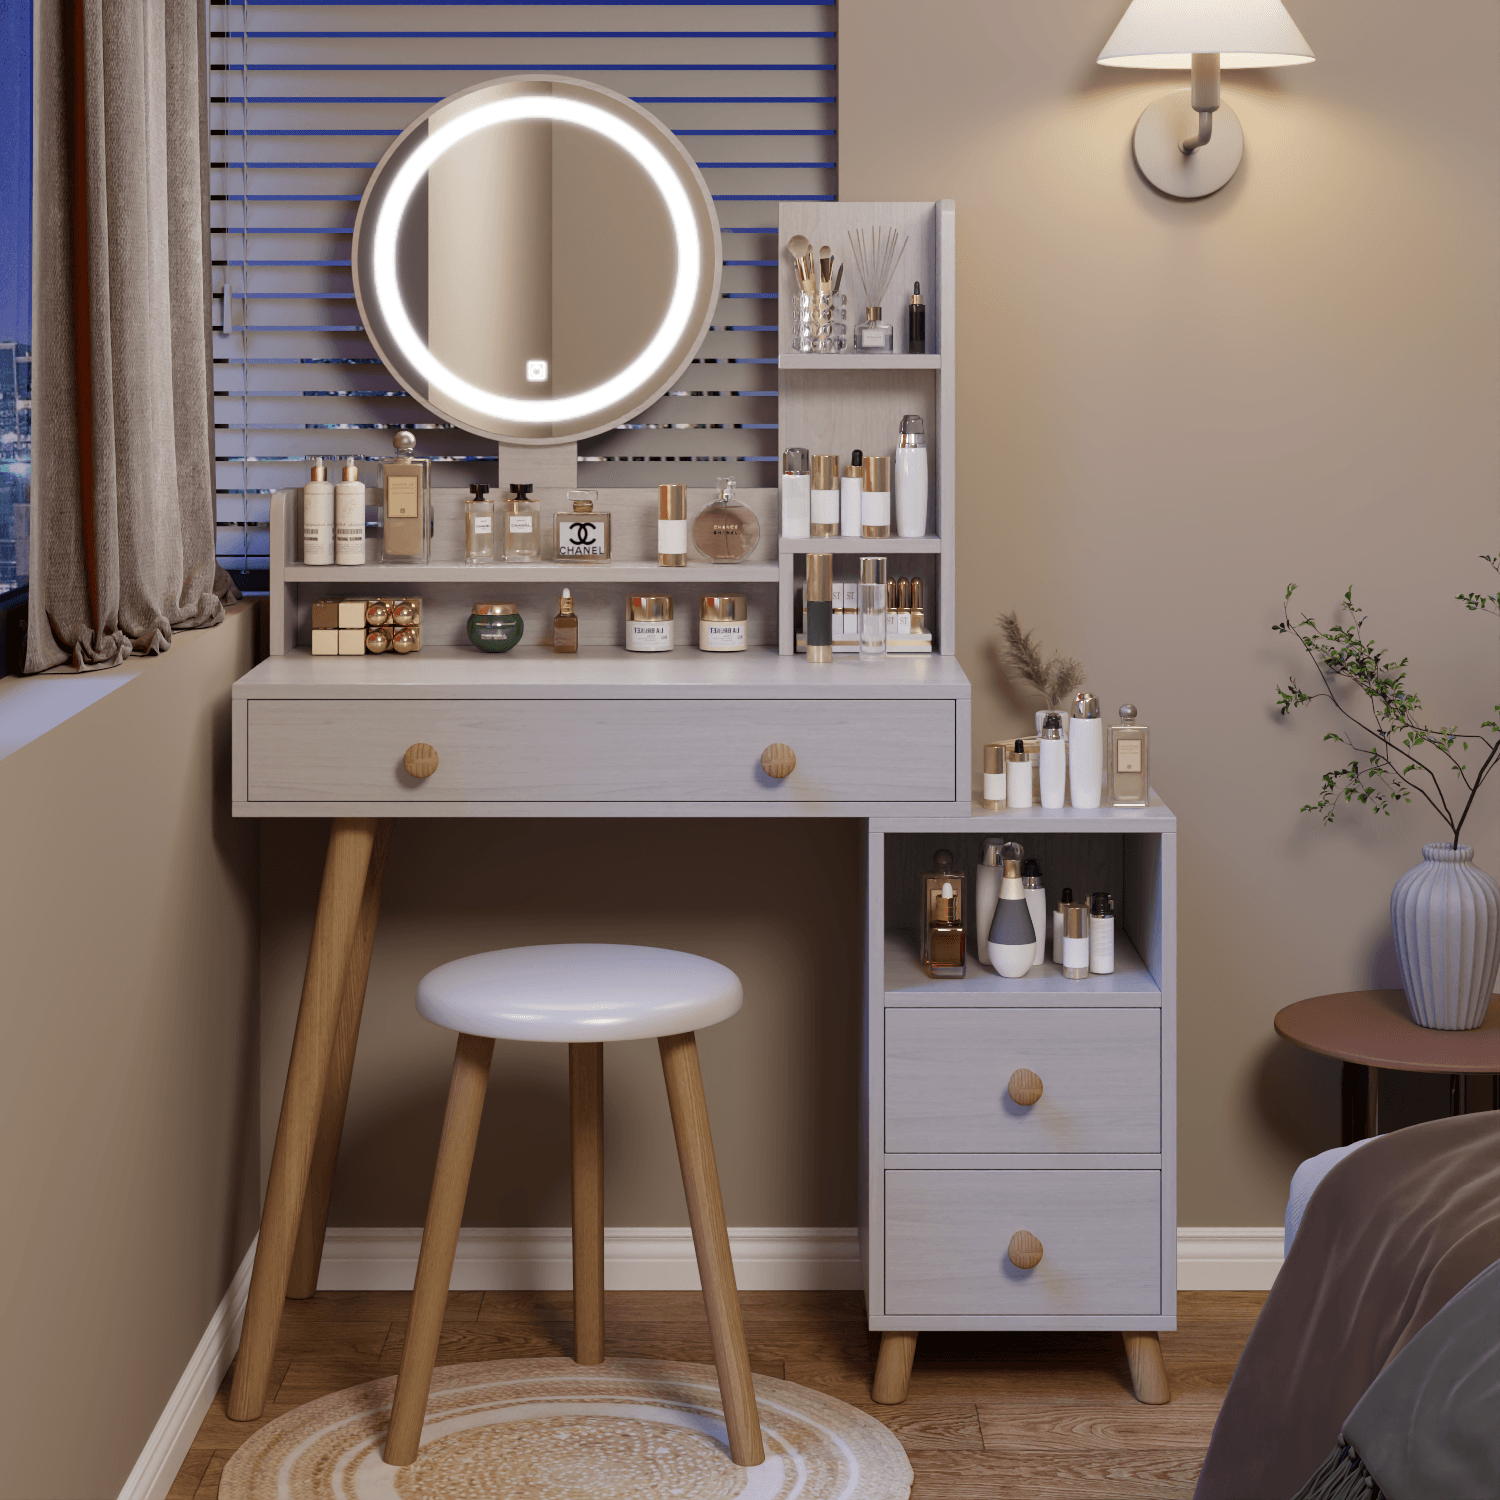 🆓🚛 Round Mirror Bedside Cabinet Vanity Table + Cushioned Stool, 17" Diameter Led Mirror, Touch Control, 3-Color, Brightness Adjustable, Large Desktop, Right Bedside Cabinet, Multi-Layer Storage